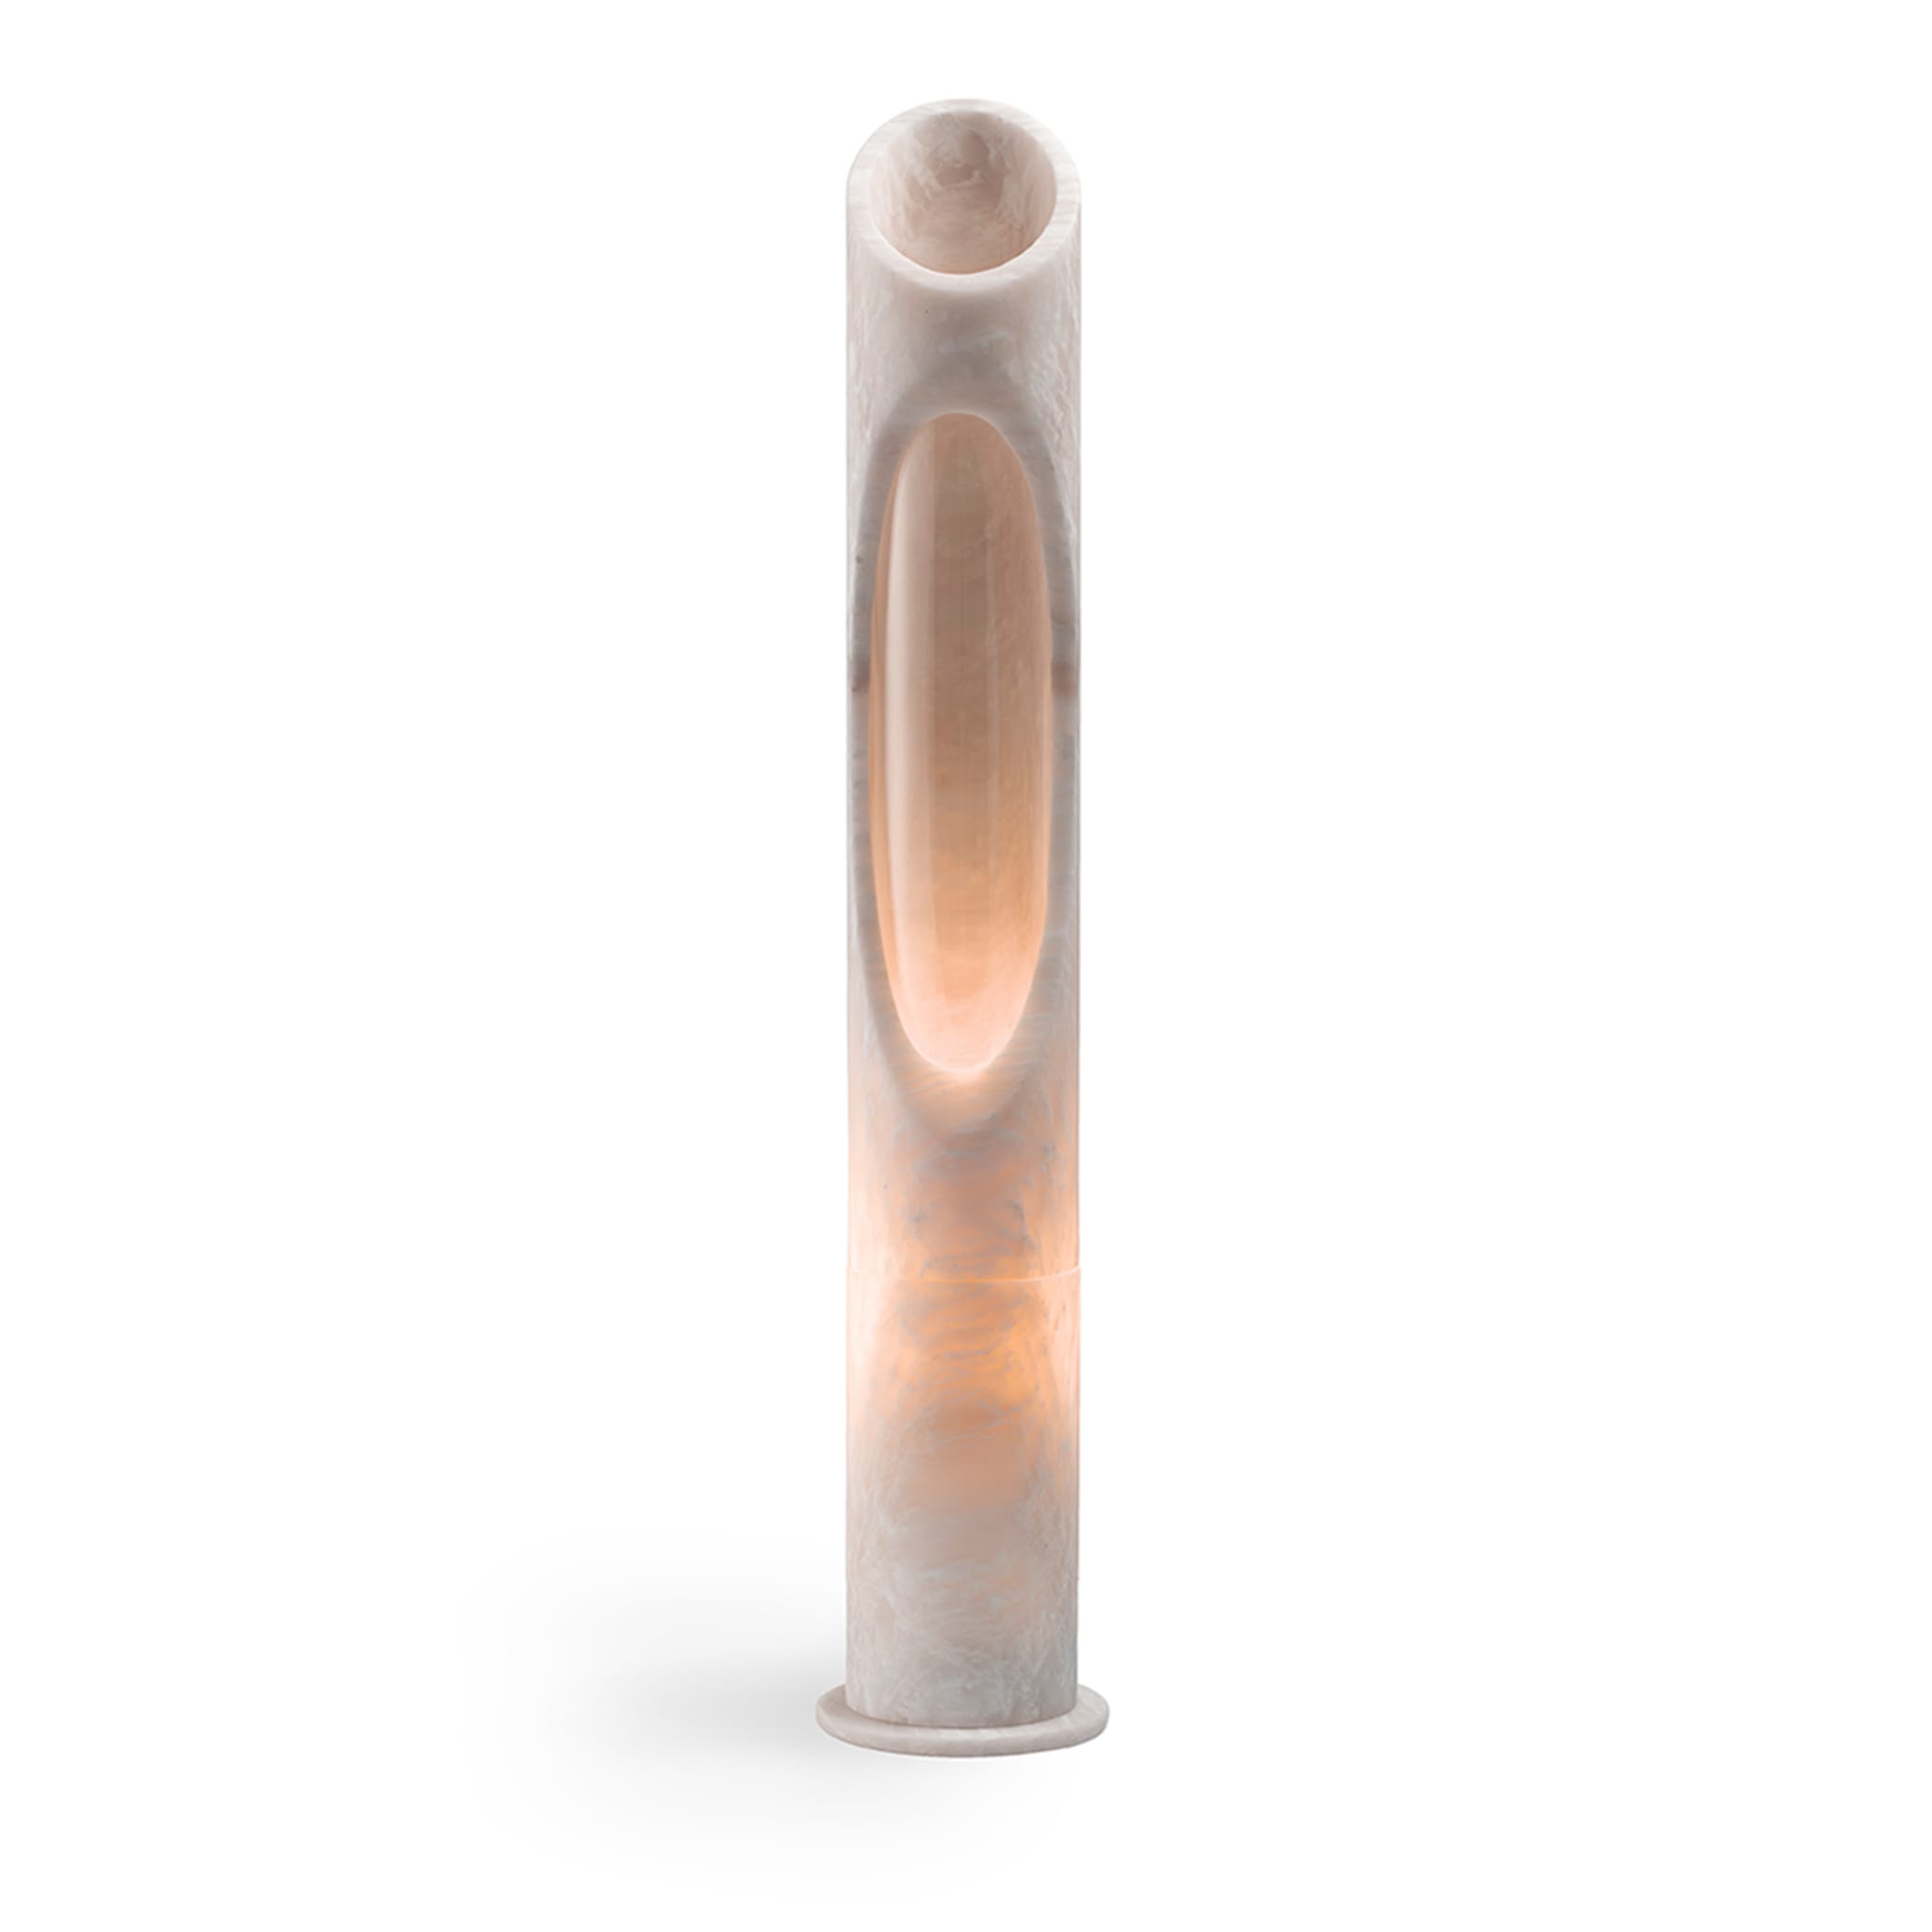 Armonia Lamp L in Pink Egeo marble by Jacopo Simonetti - Alternative view 1